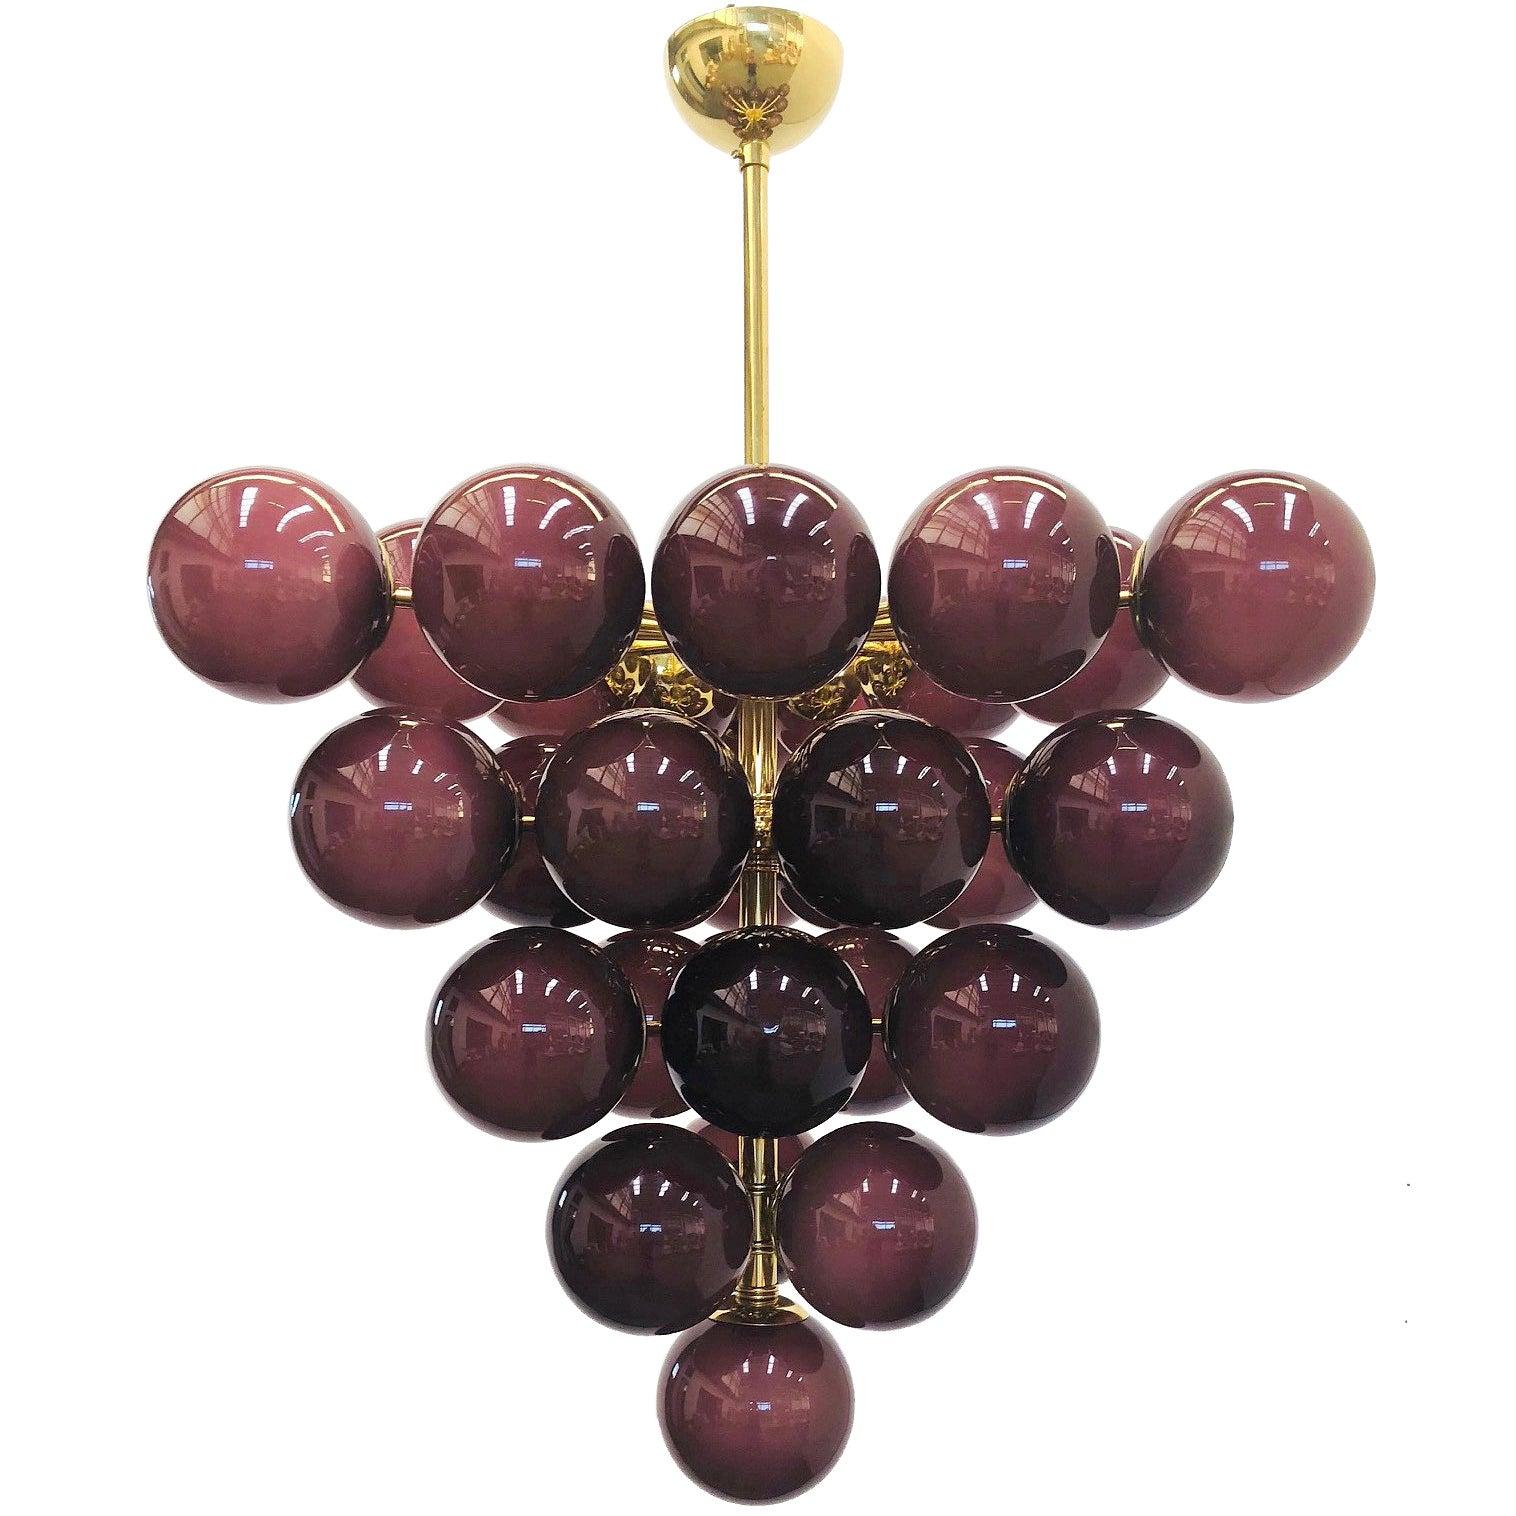 Italian chandelier with Amethyst Murano glass globes mounted on polished brass frame / Designed by Fabio Bergomi for Fabio Ltd / Made in Italy
31 lights / E12 or E14 type / max 40W each
Measures: Diameter 31.5 inches / height 31.5 inches not